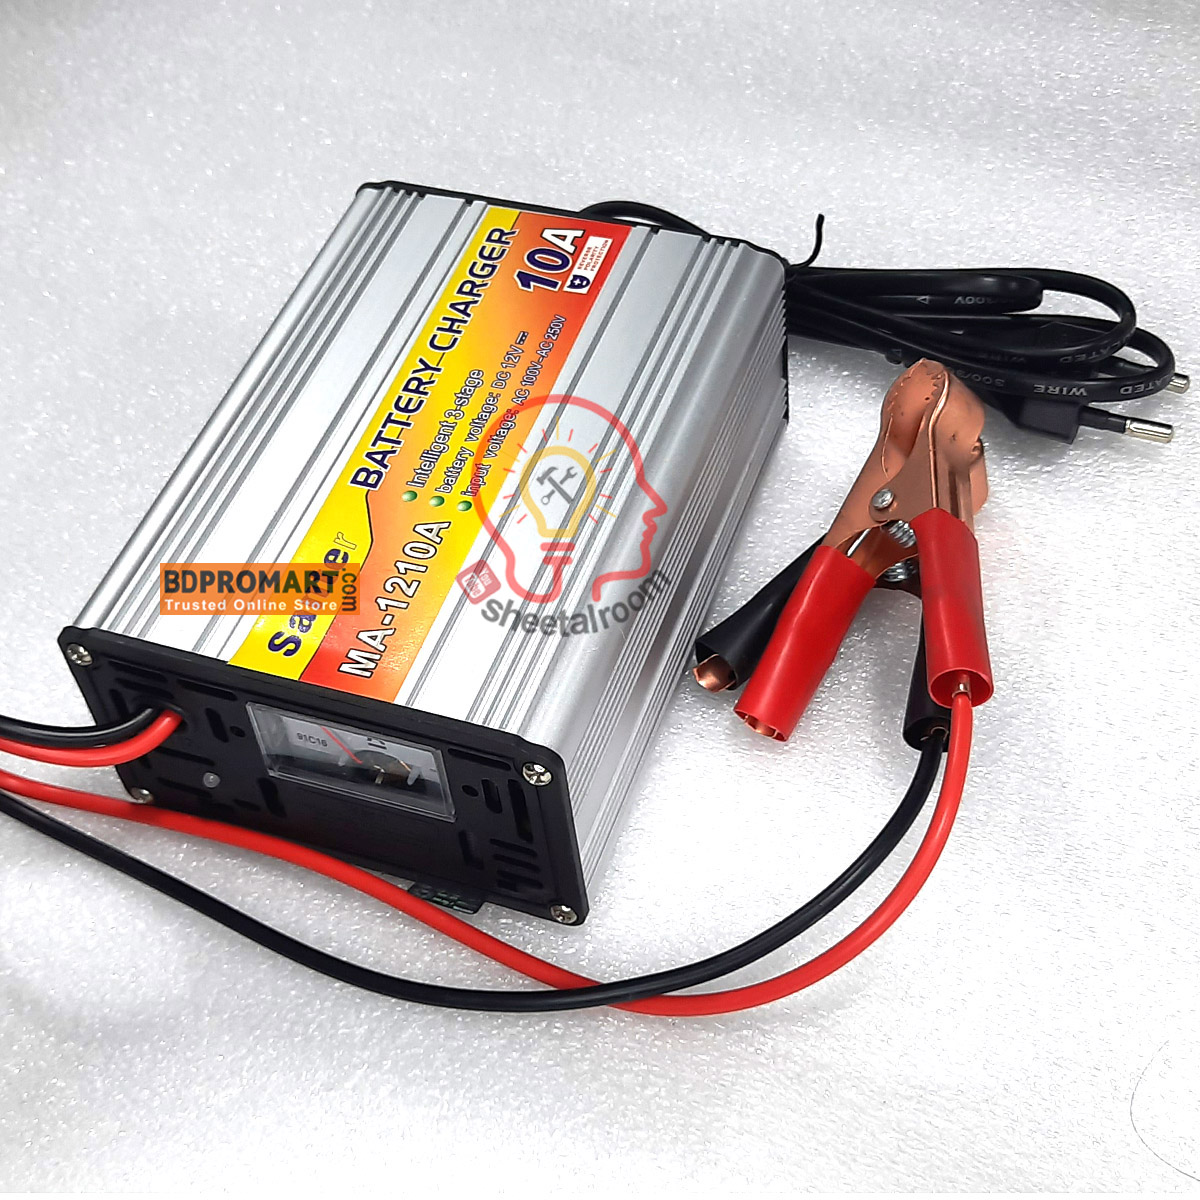 12v Battery Charger 10A Full Auto & Analog Display Meter for Dry